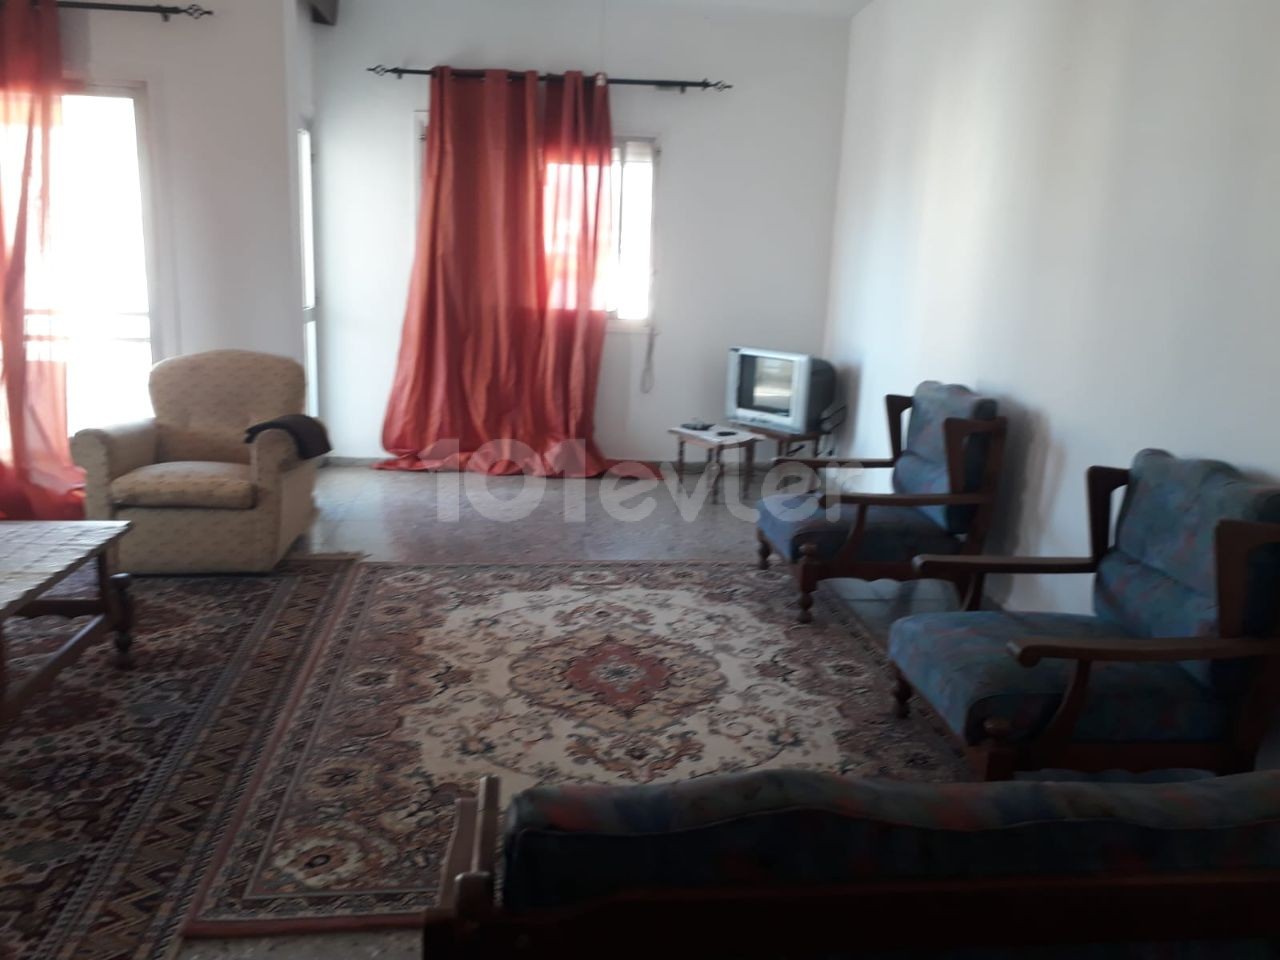 OPPORTUNITY! Investment apartment for sale from the owner in Gönyelide!